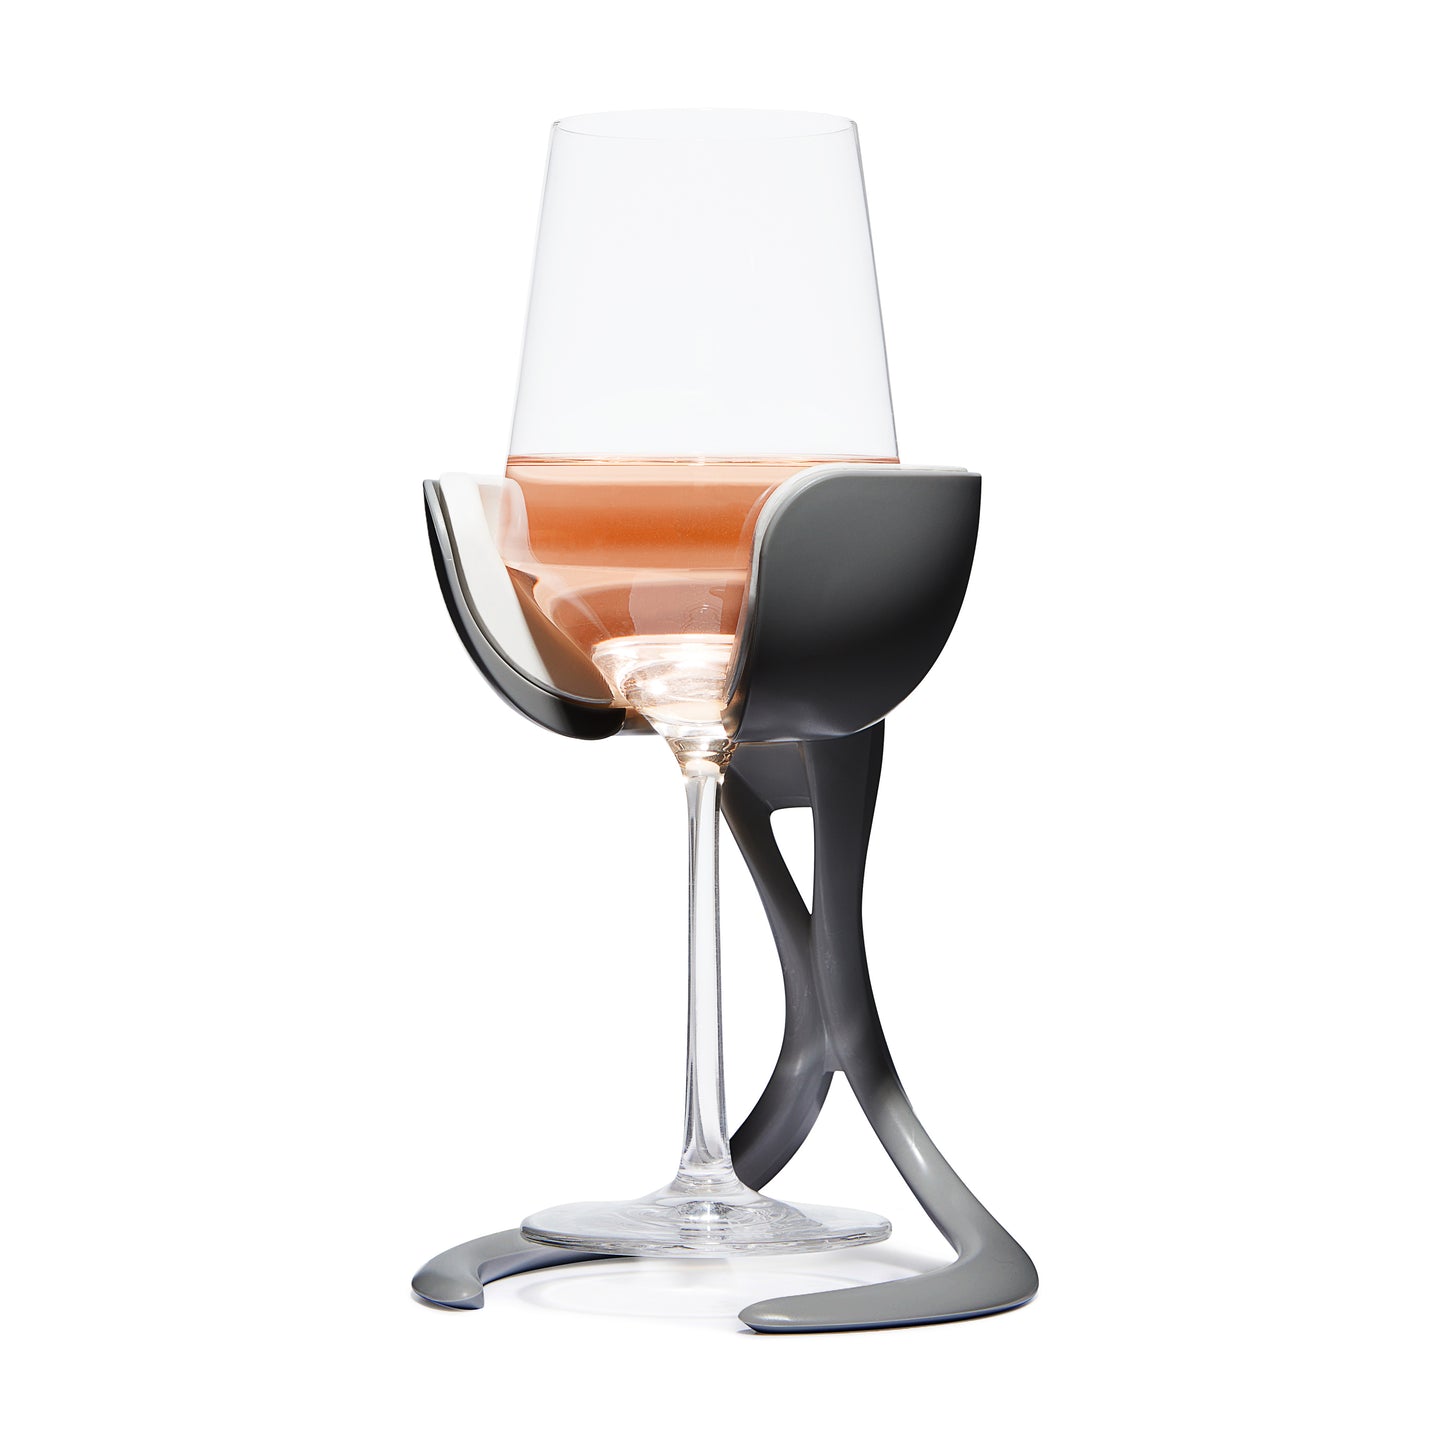 Graphite color stemmed wine glass chiller on white background by VoChill Inc.